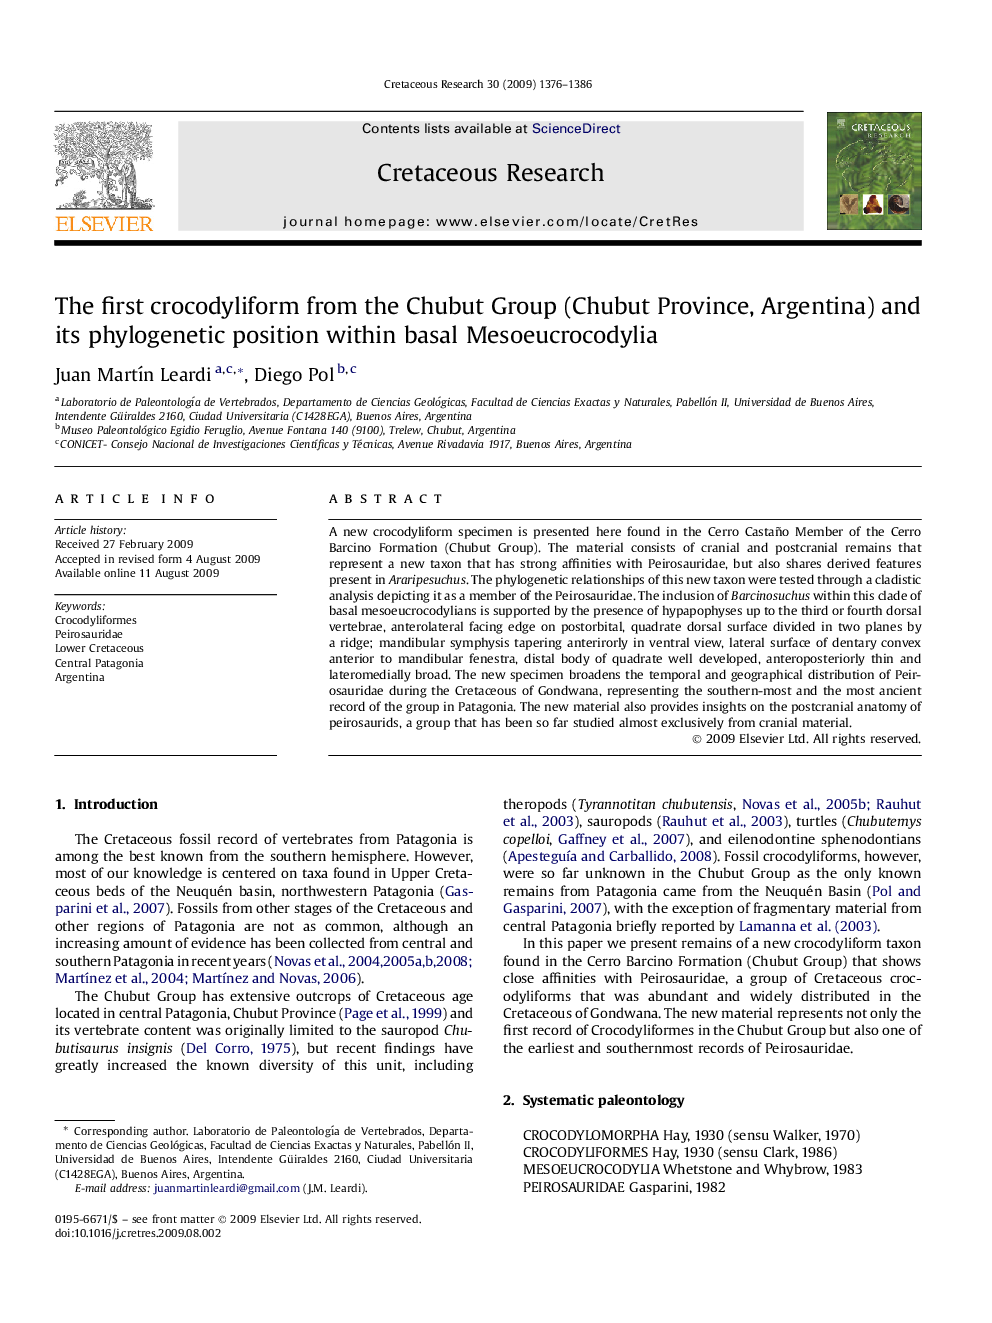 The first crocodyliform from the Chubut Group (Chubut Province, Argentina) and its phylogenetic position within basal Mesoeucrocodylia